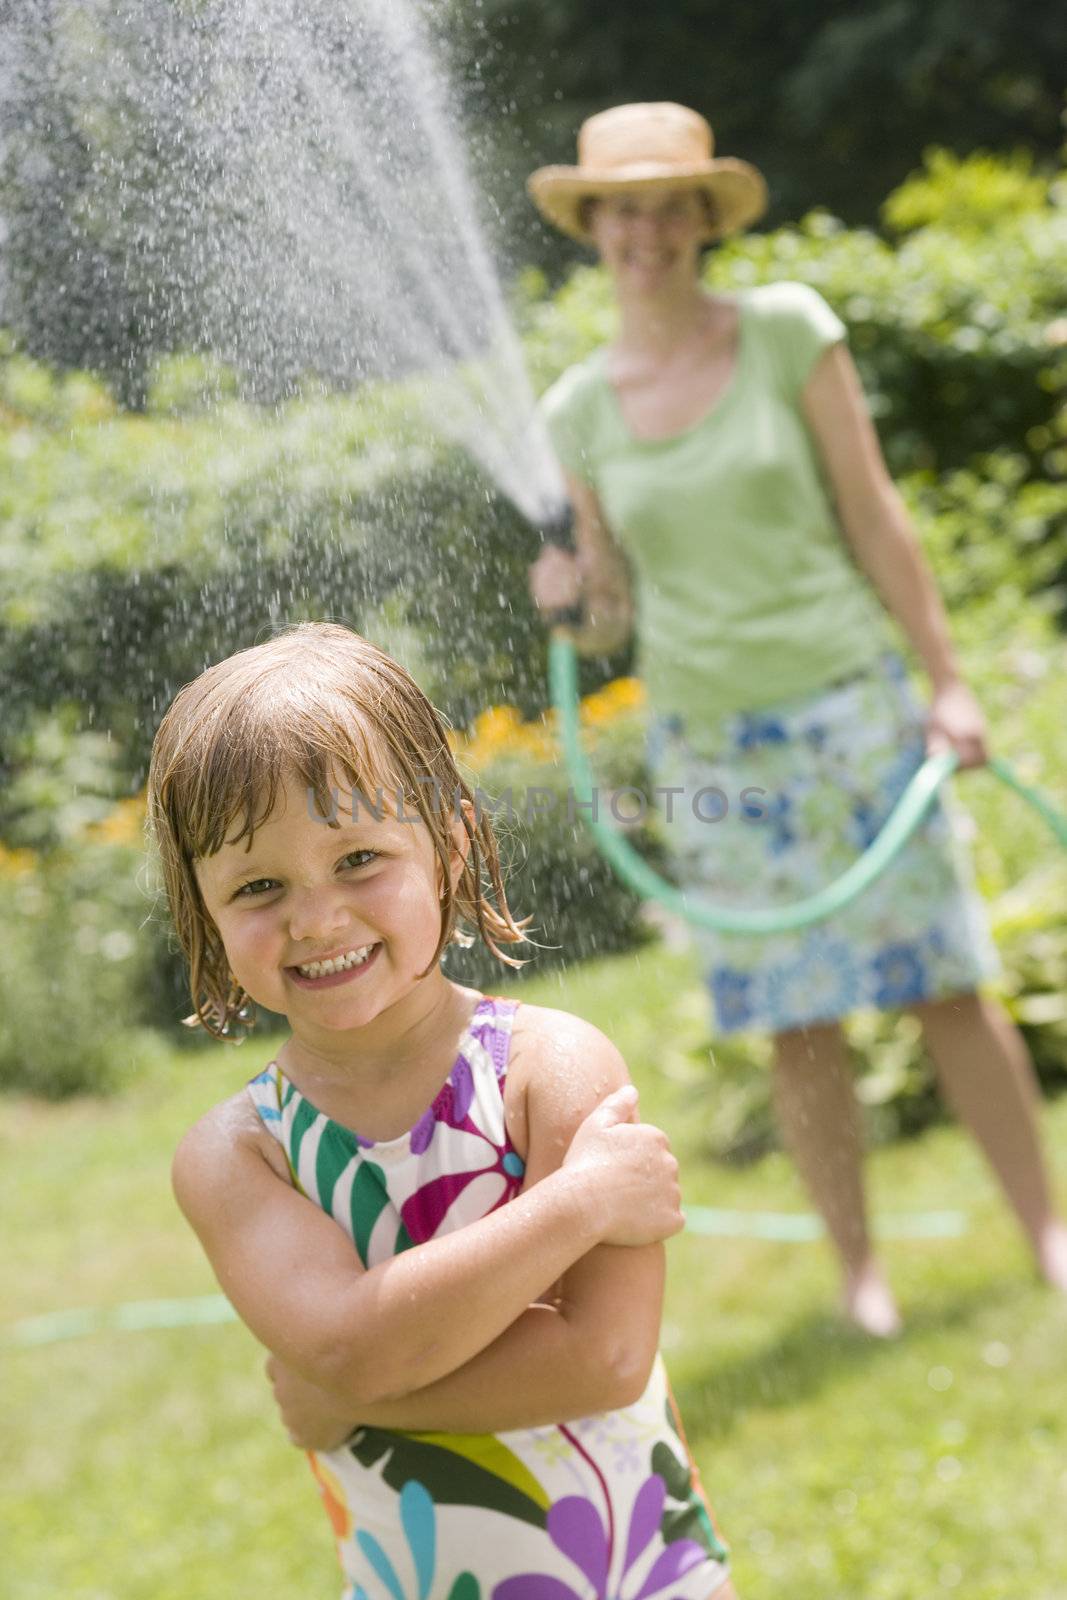 Pretty woman spraying little girl with water from a garden hose in the Summertime